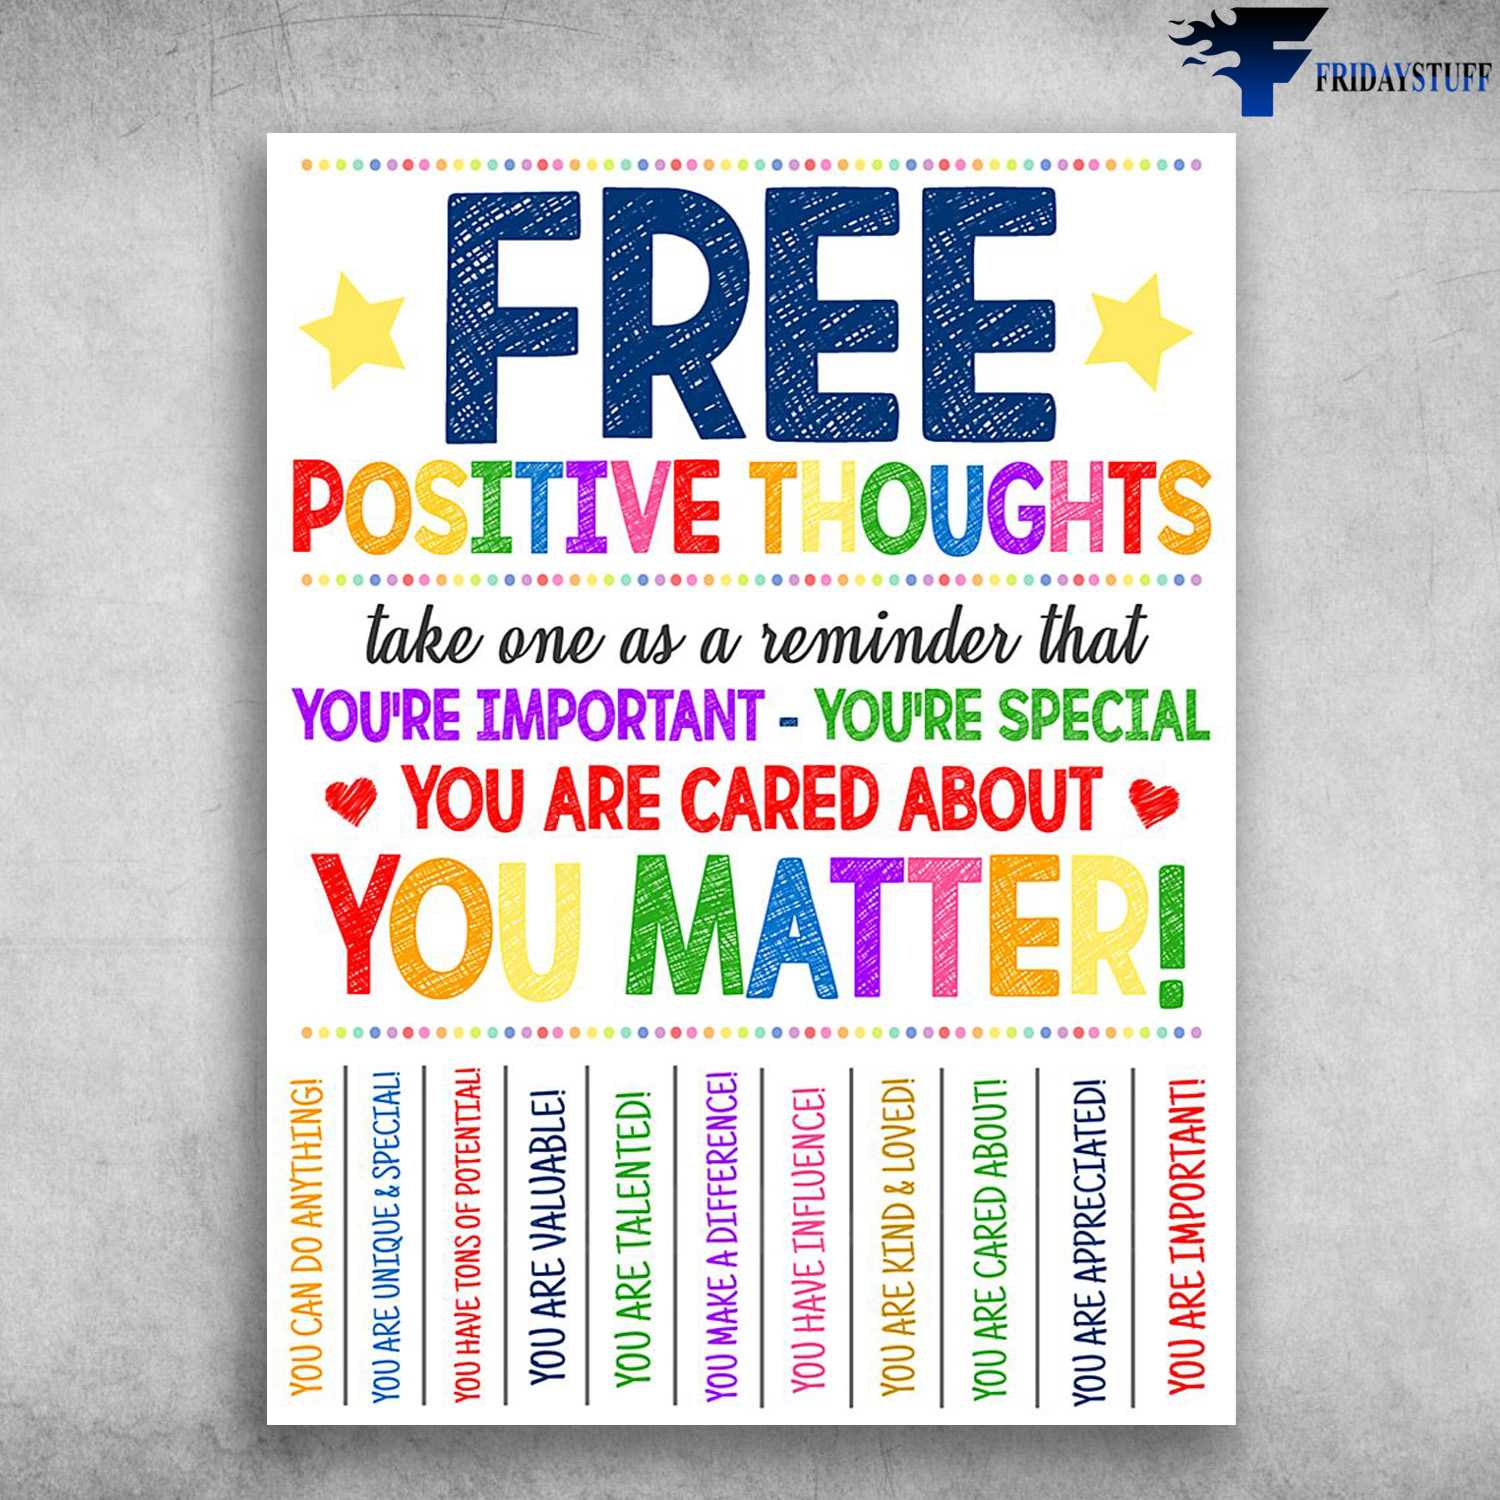 Free Positive Thoughts, Take One As A Riminder That, You're Important, You're Special, You Are Cared About, You Matter, You Can Do Anything, You Are Unique And Special